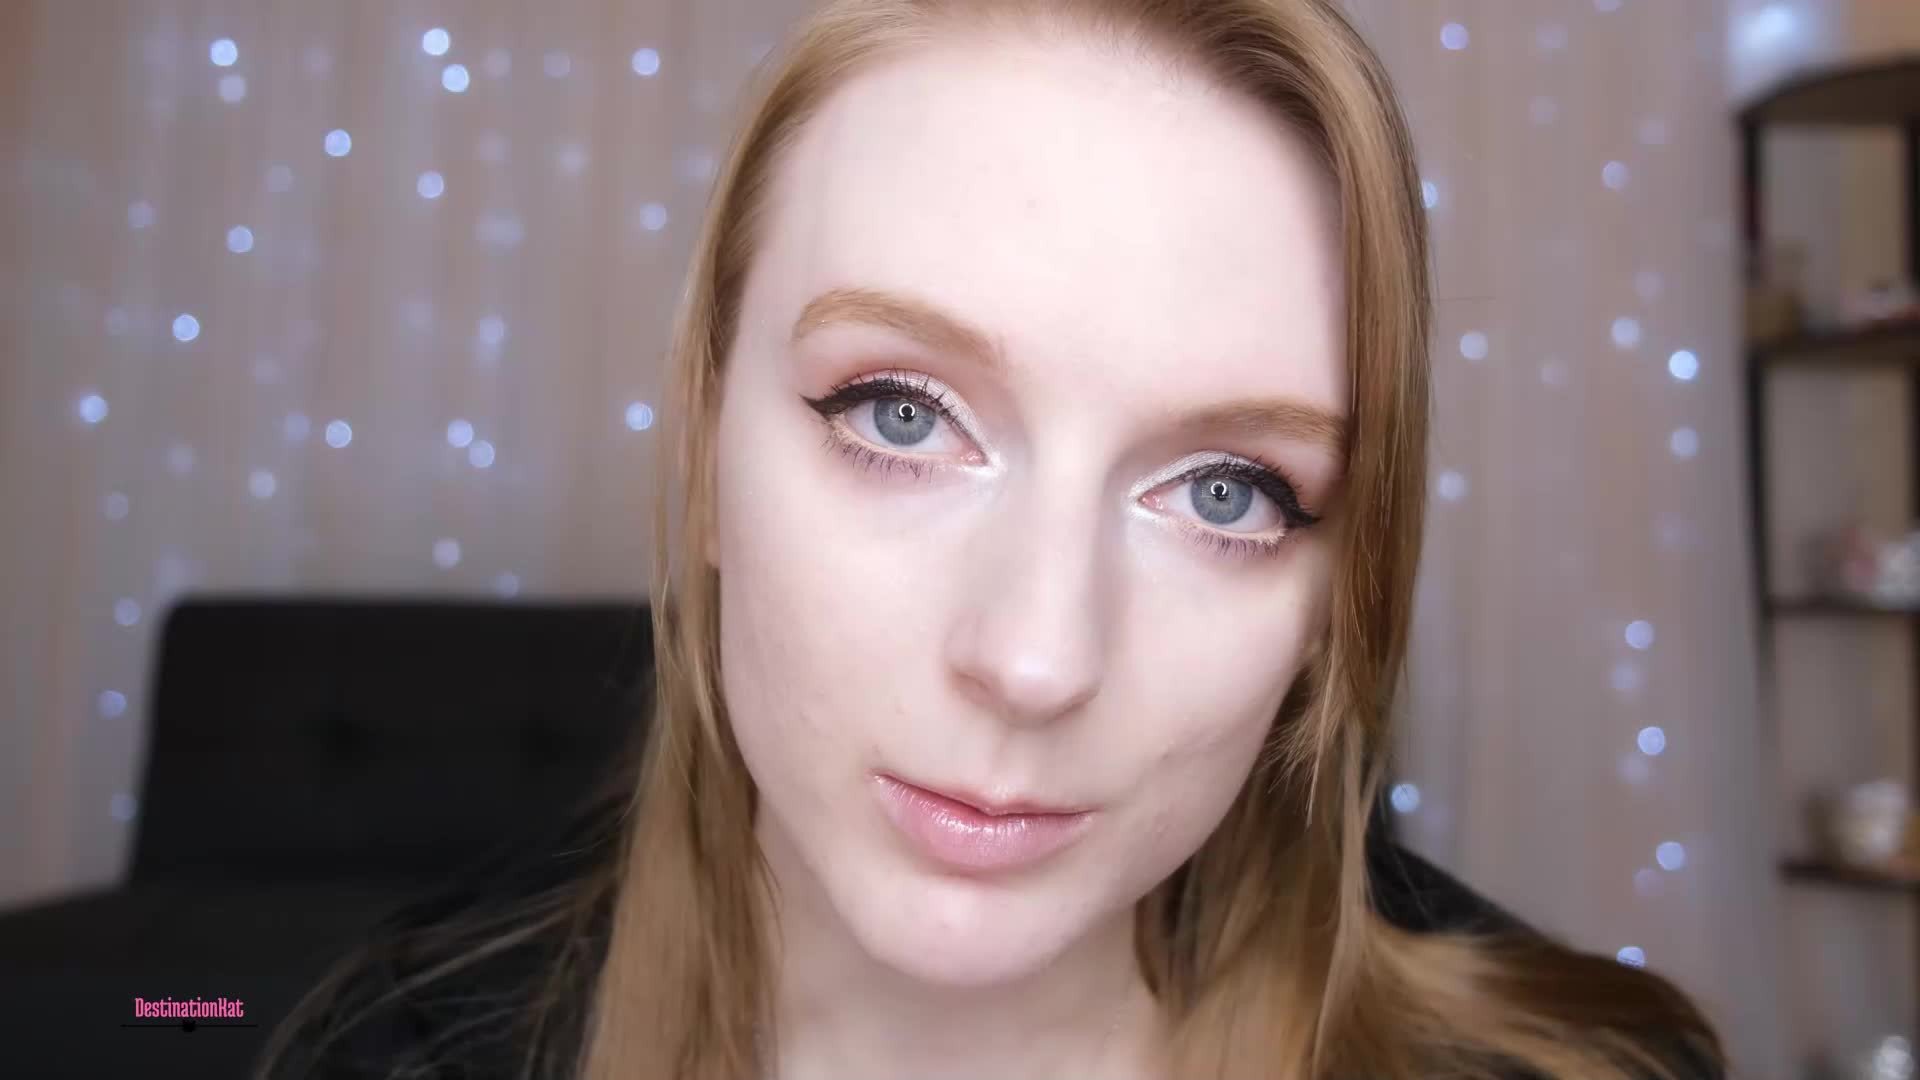 Watch the Video by DestinationKat with the username @DestinationKat, who is a star user, posted on February 16, 2021 and the text says 'new femdom / chastity video
https://www.manyvids.com/Video/2572365/Youre-Just-A-Wallet/'